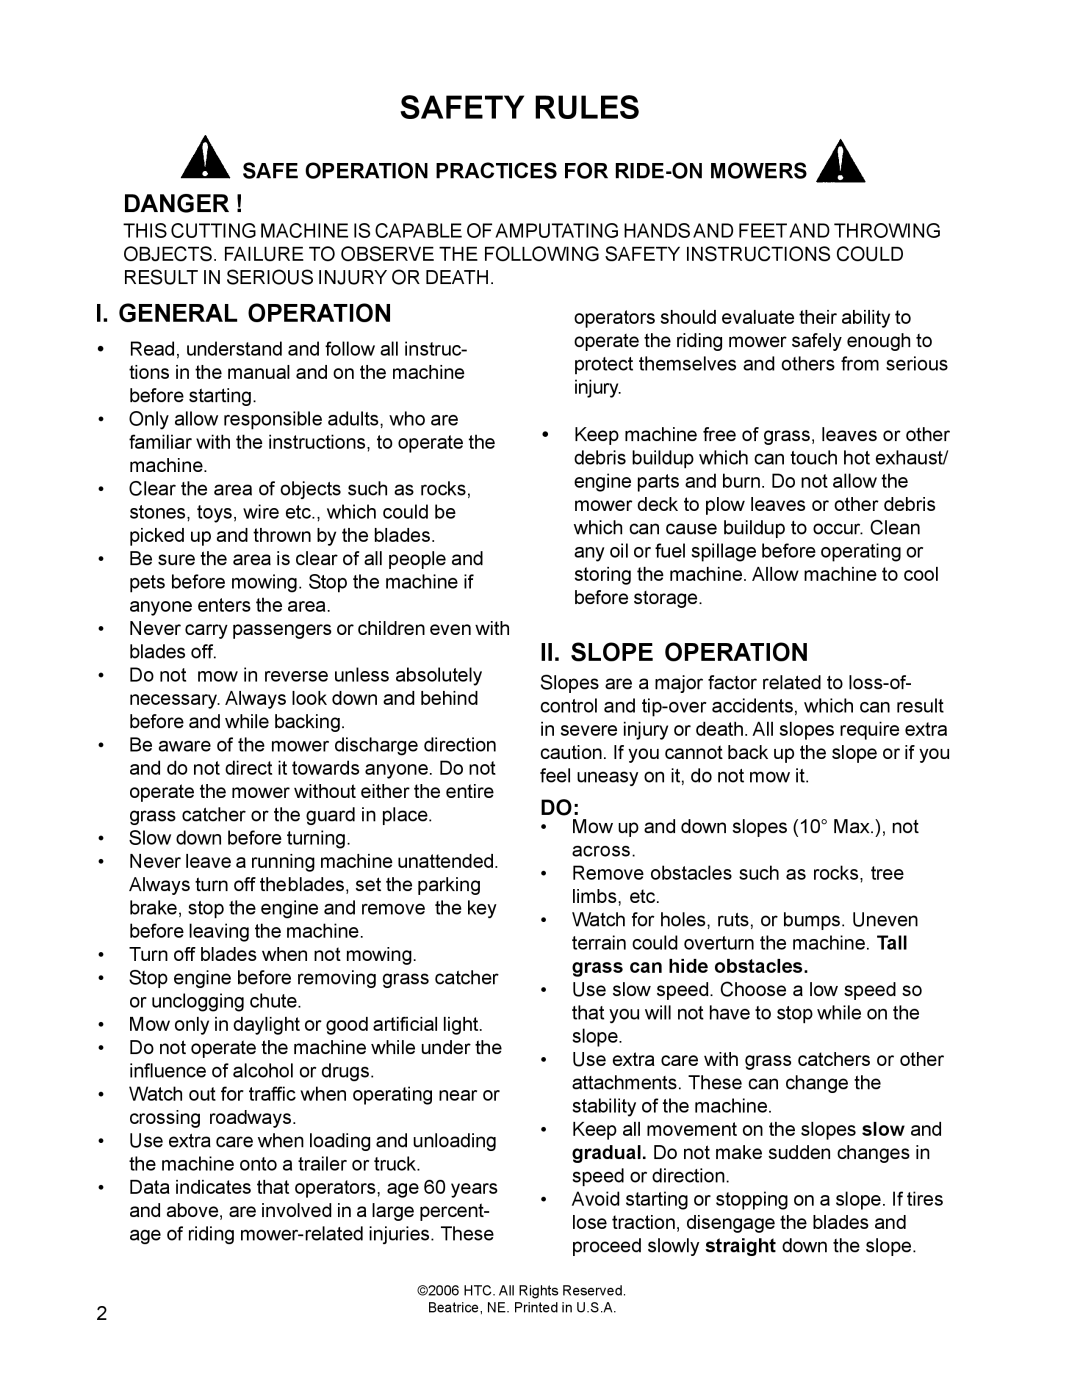 HTC 110163 / CZ38 manual Safety Rules, Danger, I. General Operation, Ii. Slope Operation 